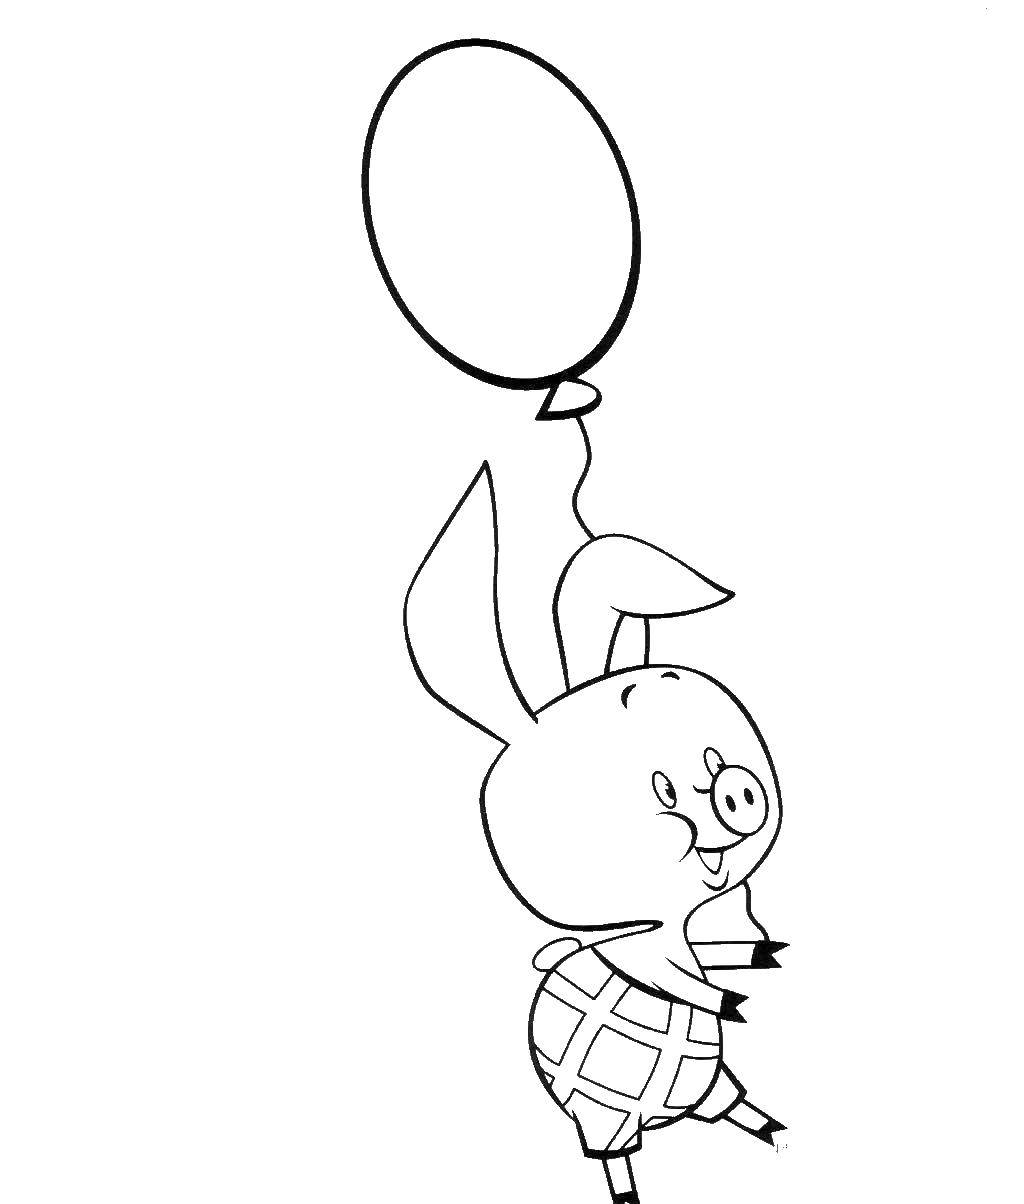 Coloring Piglet with balloon. Category Soviet coloring. Tags:  That, Piglet.